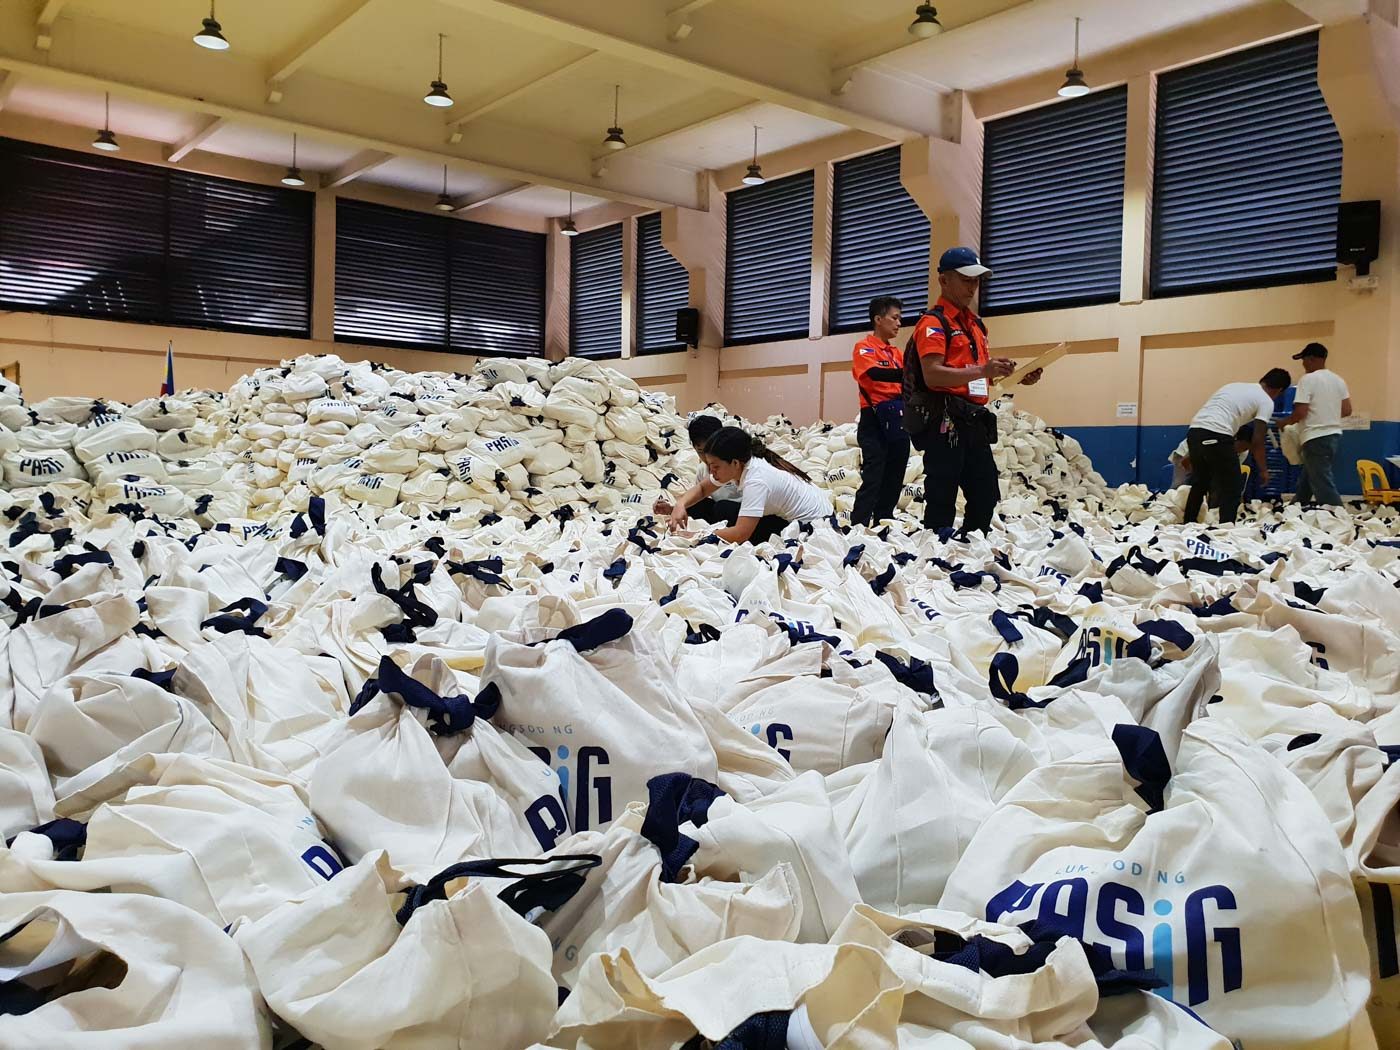 FROM SAVINGS. Cleaning up the bureaucracy yielded savings in the local government's finances, enabling Pasig to produce enough goody bags for every family in the city. Photo by JC Gotinga/Rappler 